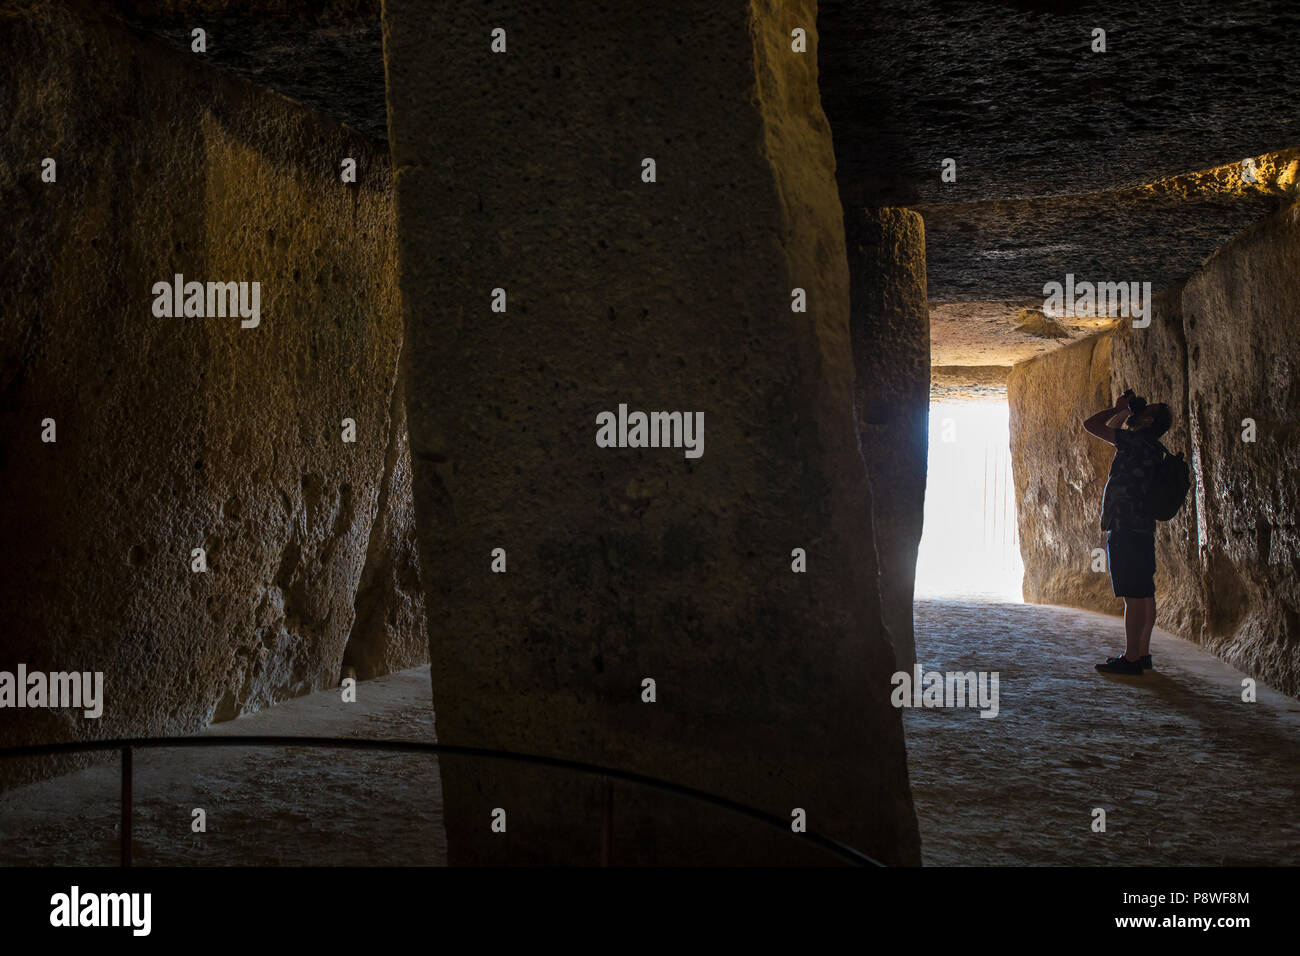 Antequera, Spain - July 10th, 2018: Visitor takes pictures at interior chamber of Dolmen of Menga, Antequera, Spain Stock Photo